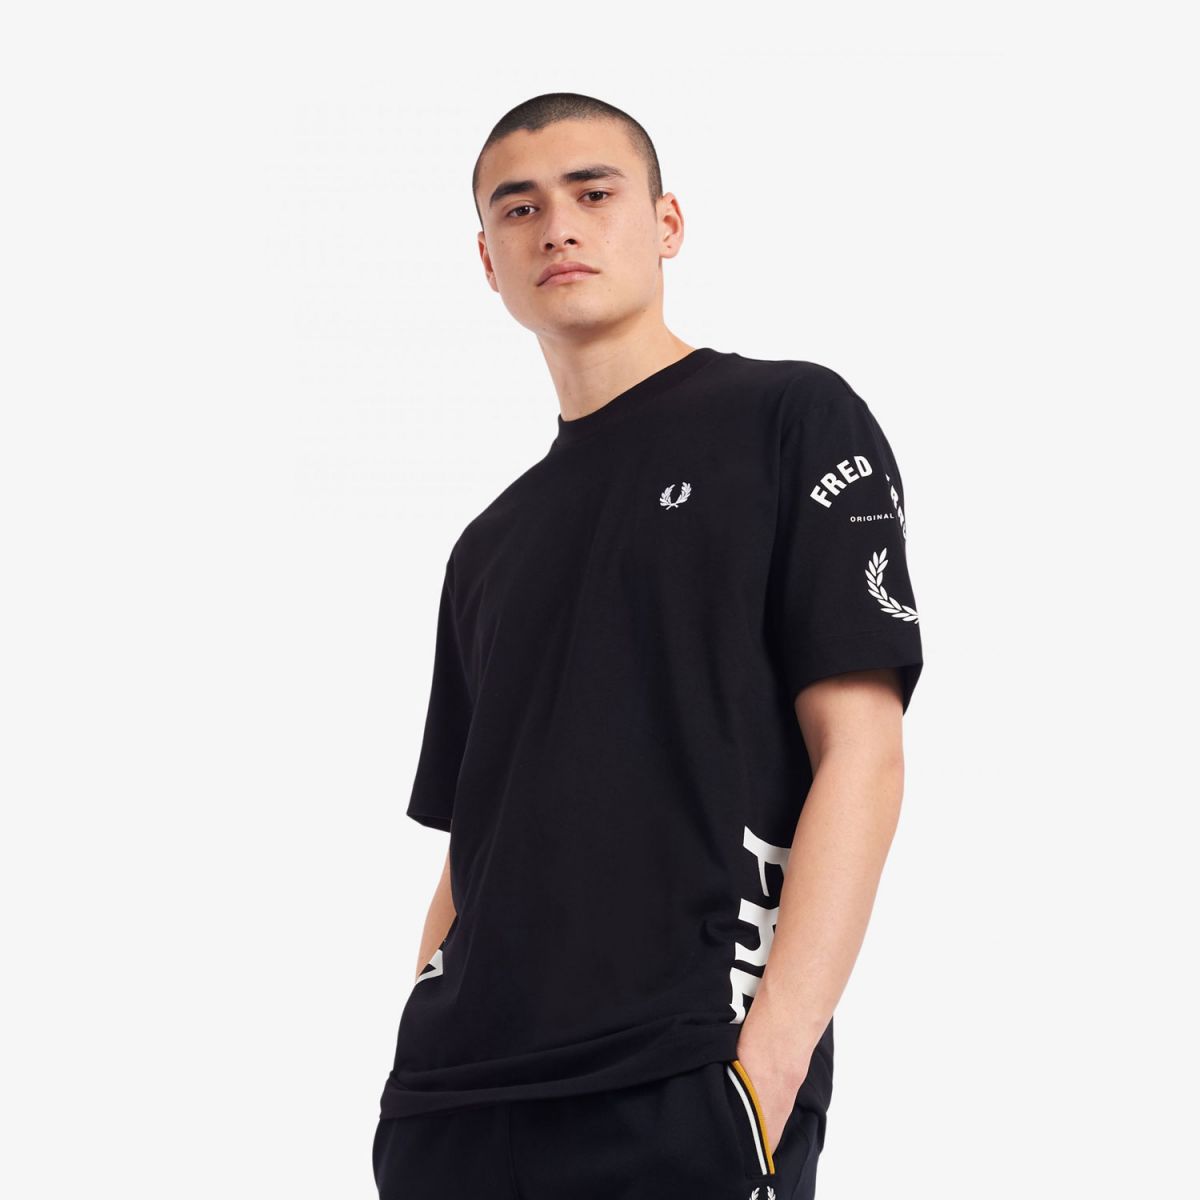 Fred Perry Bold Branding Tee - Black